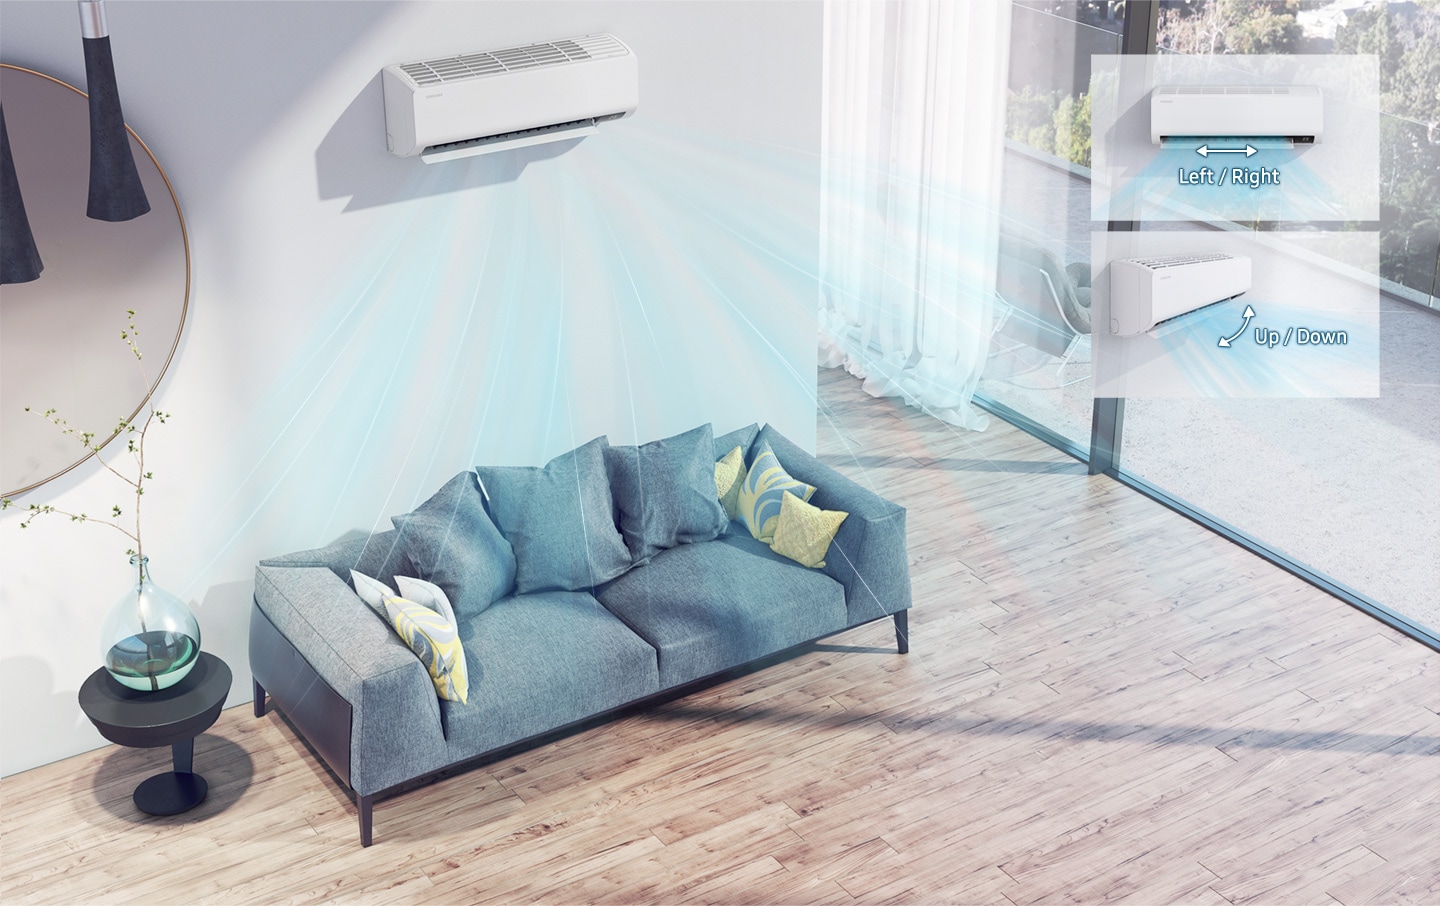 shows a wall-mounted air conditioner and illustrates how the direction of the air flow can be adjusted in 4 directions, horizontally (left to right) and vertically (up and down), to distribute air across a room quickly and evenly.